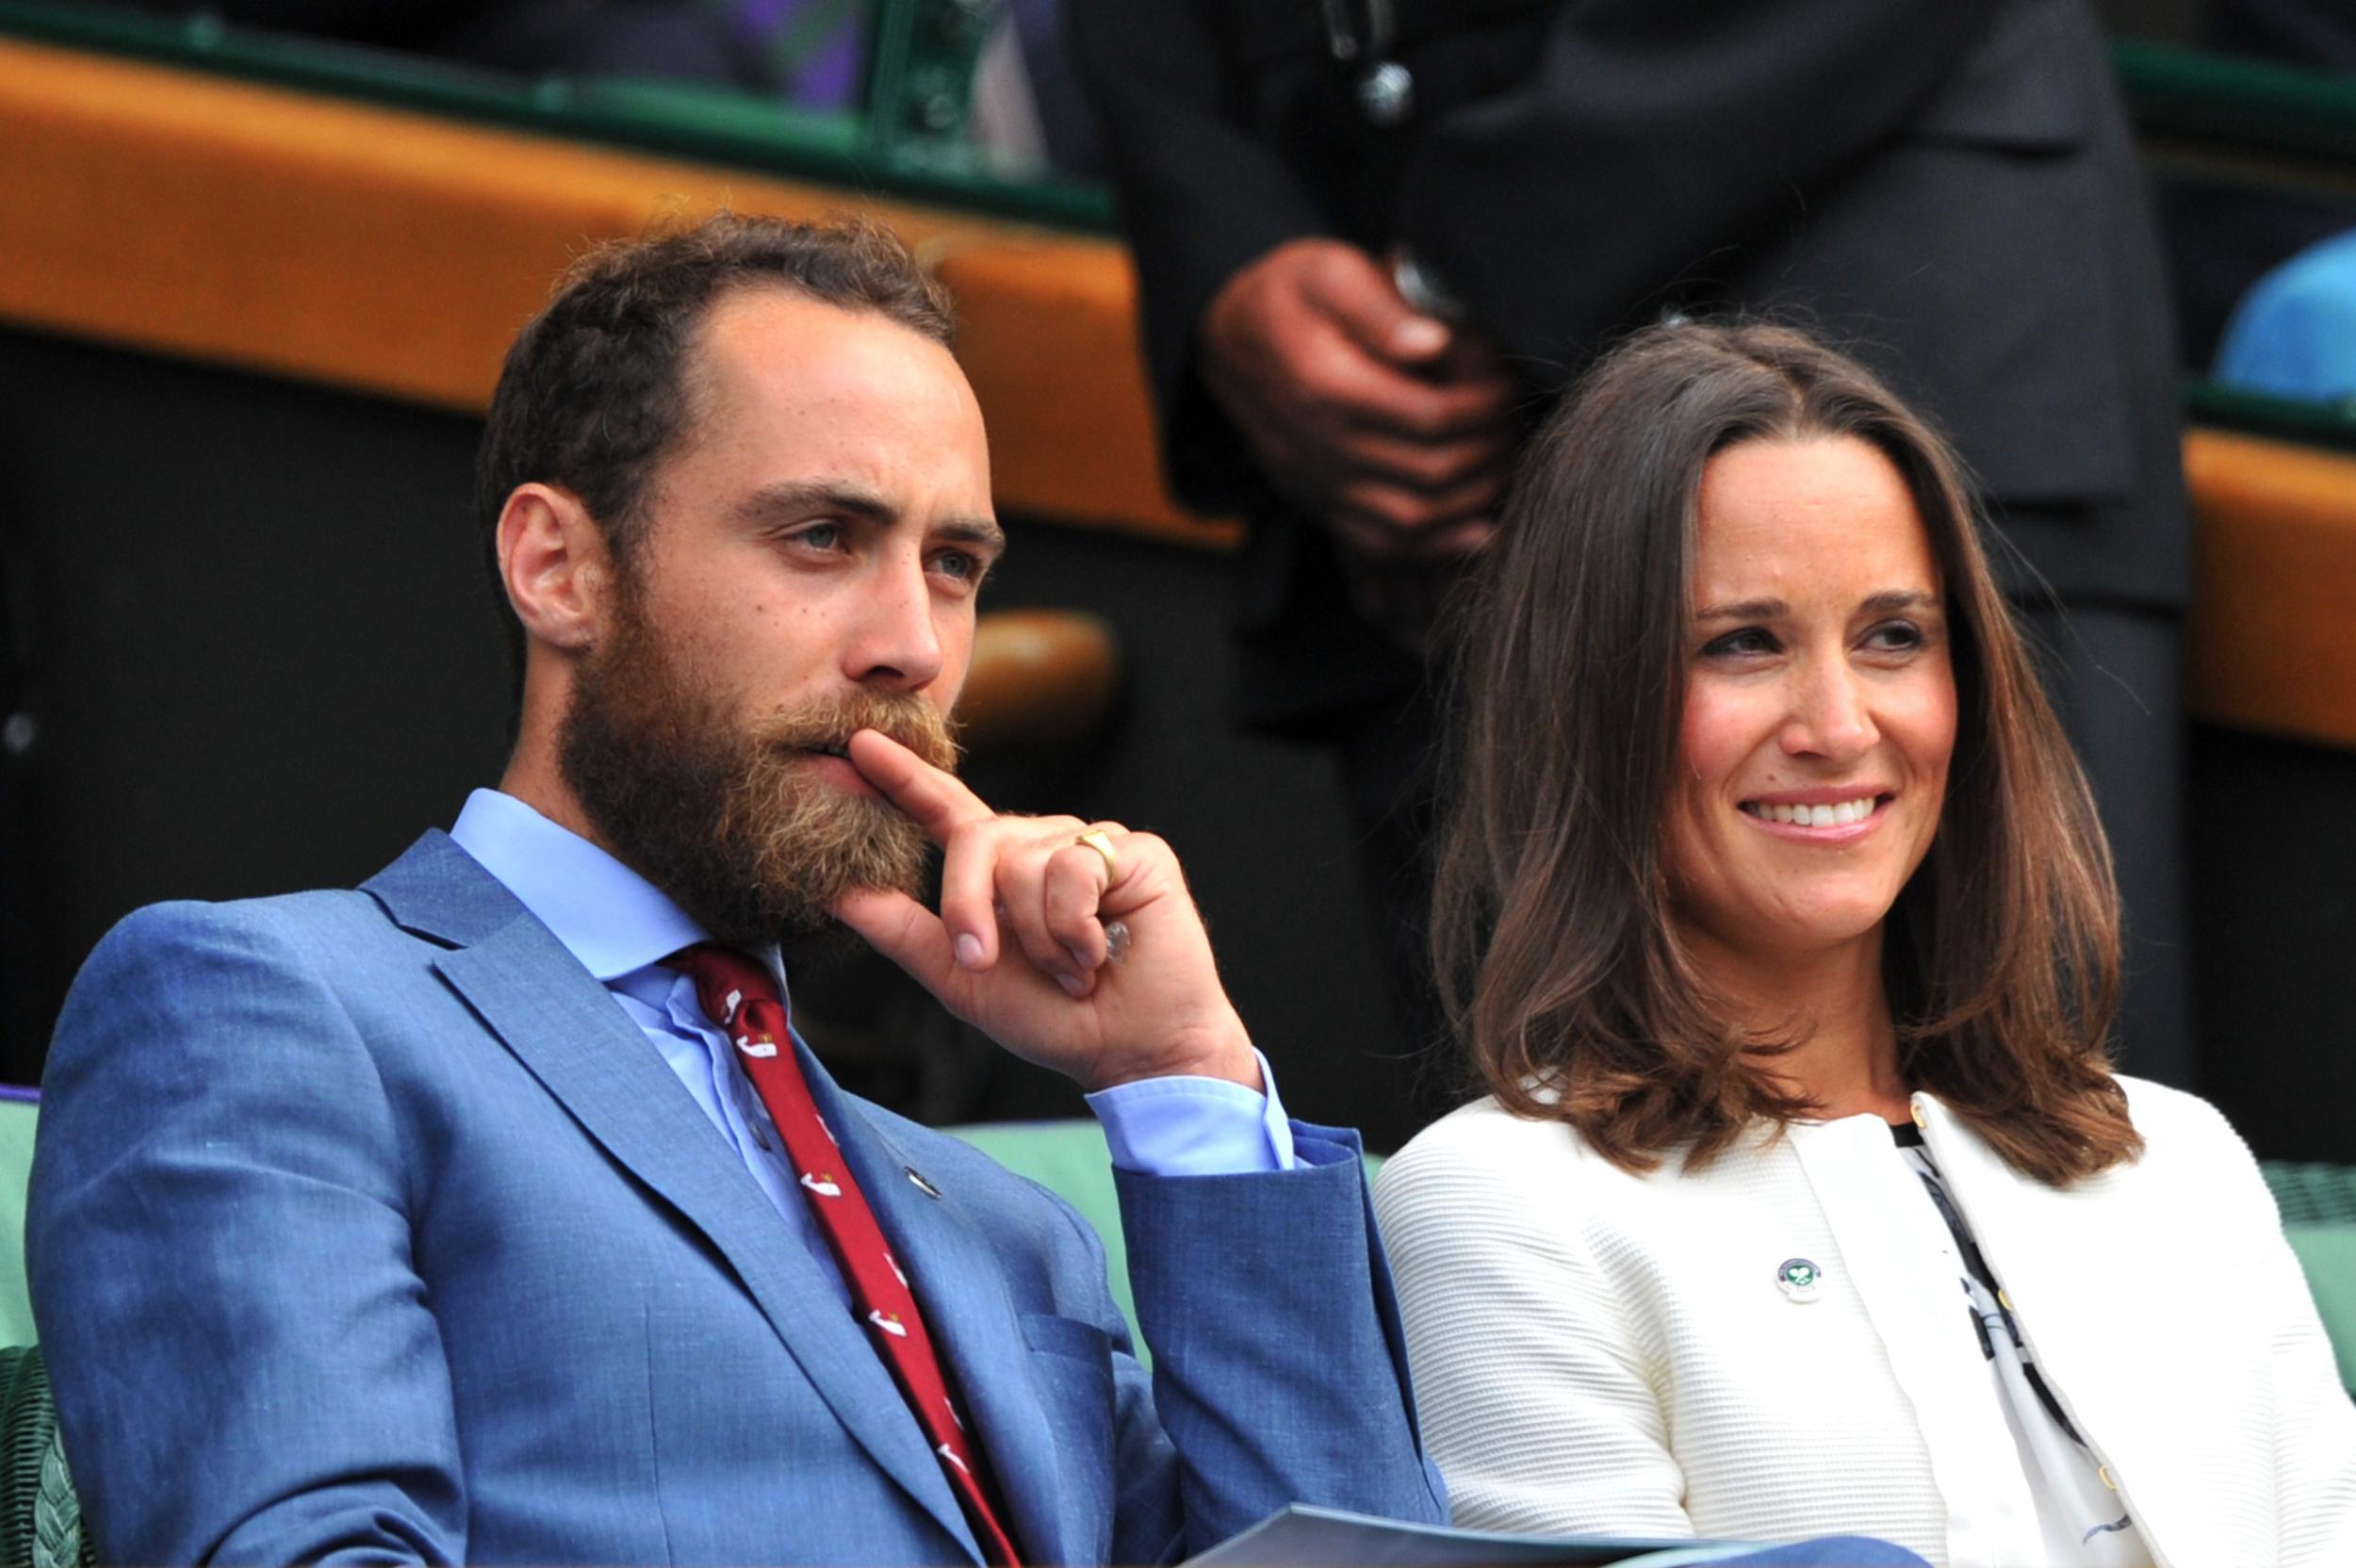 Pippa Middleton (R) and James Middleton (L), sister and brother of Catherine, Duchess of Cambridge, sit together in the Royal Box on Centre Court on day four of the 2014 Wimbledon Championships at The All England Tennis Club in Wimbledon, southwest London, on June 26, 2014.